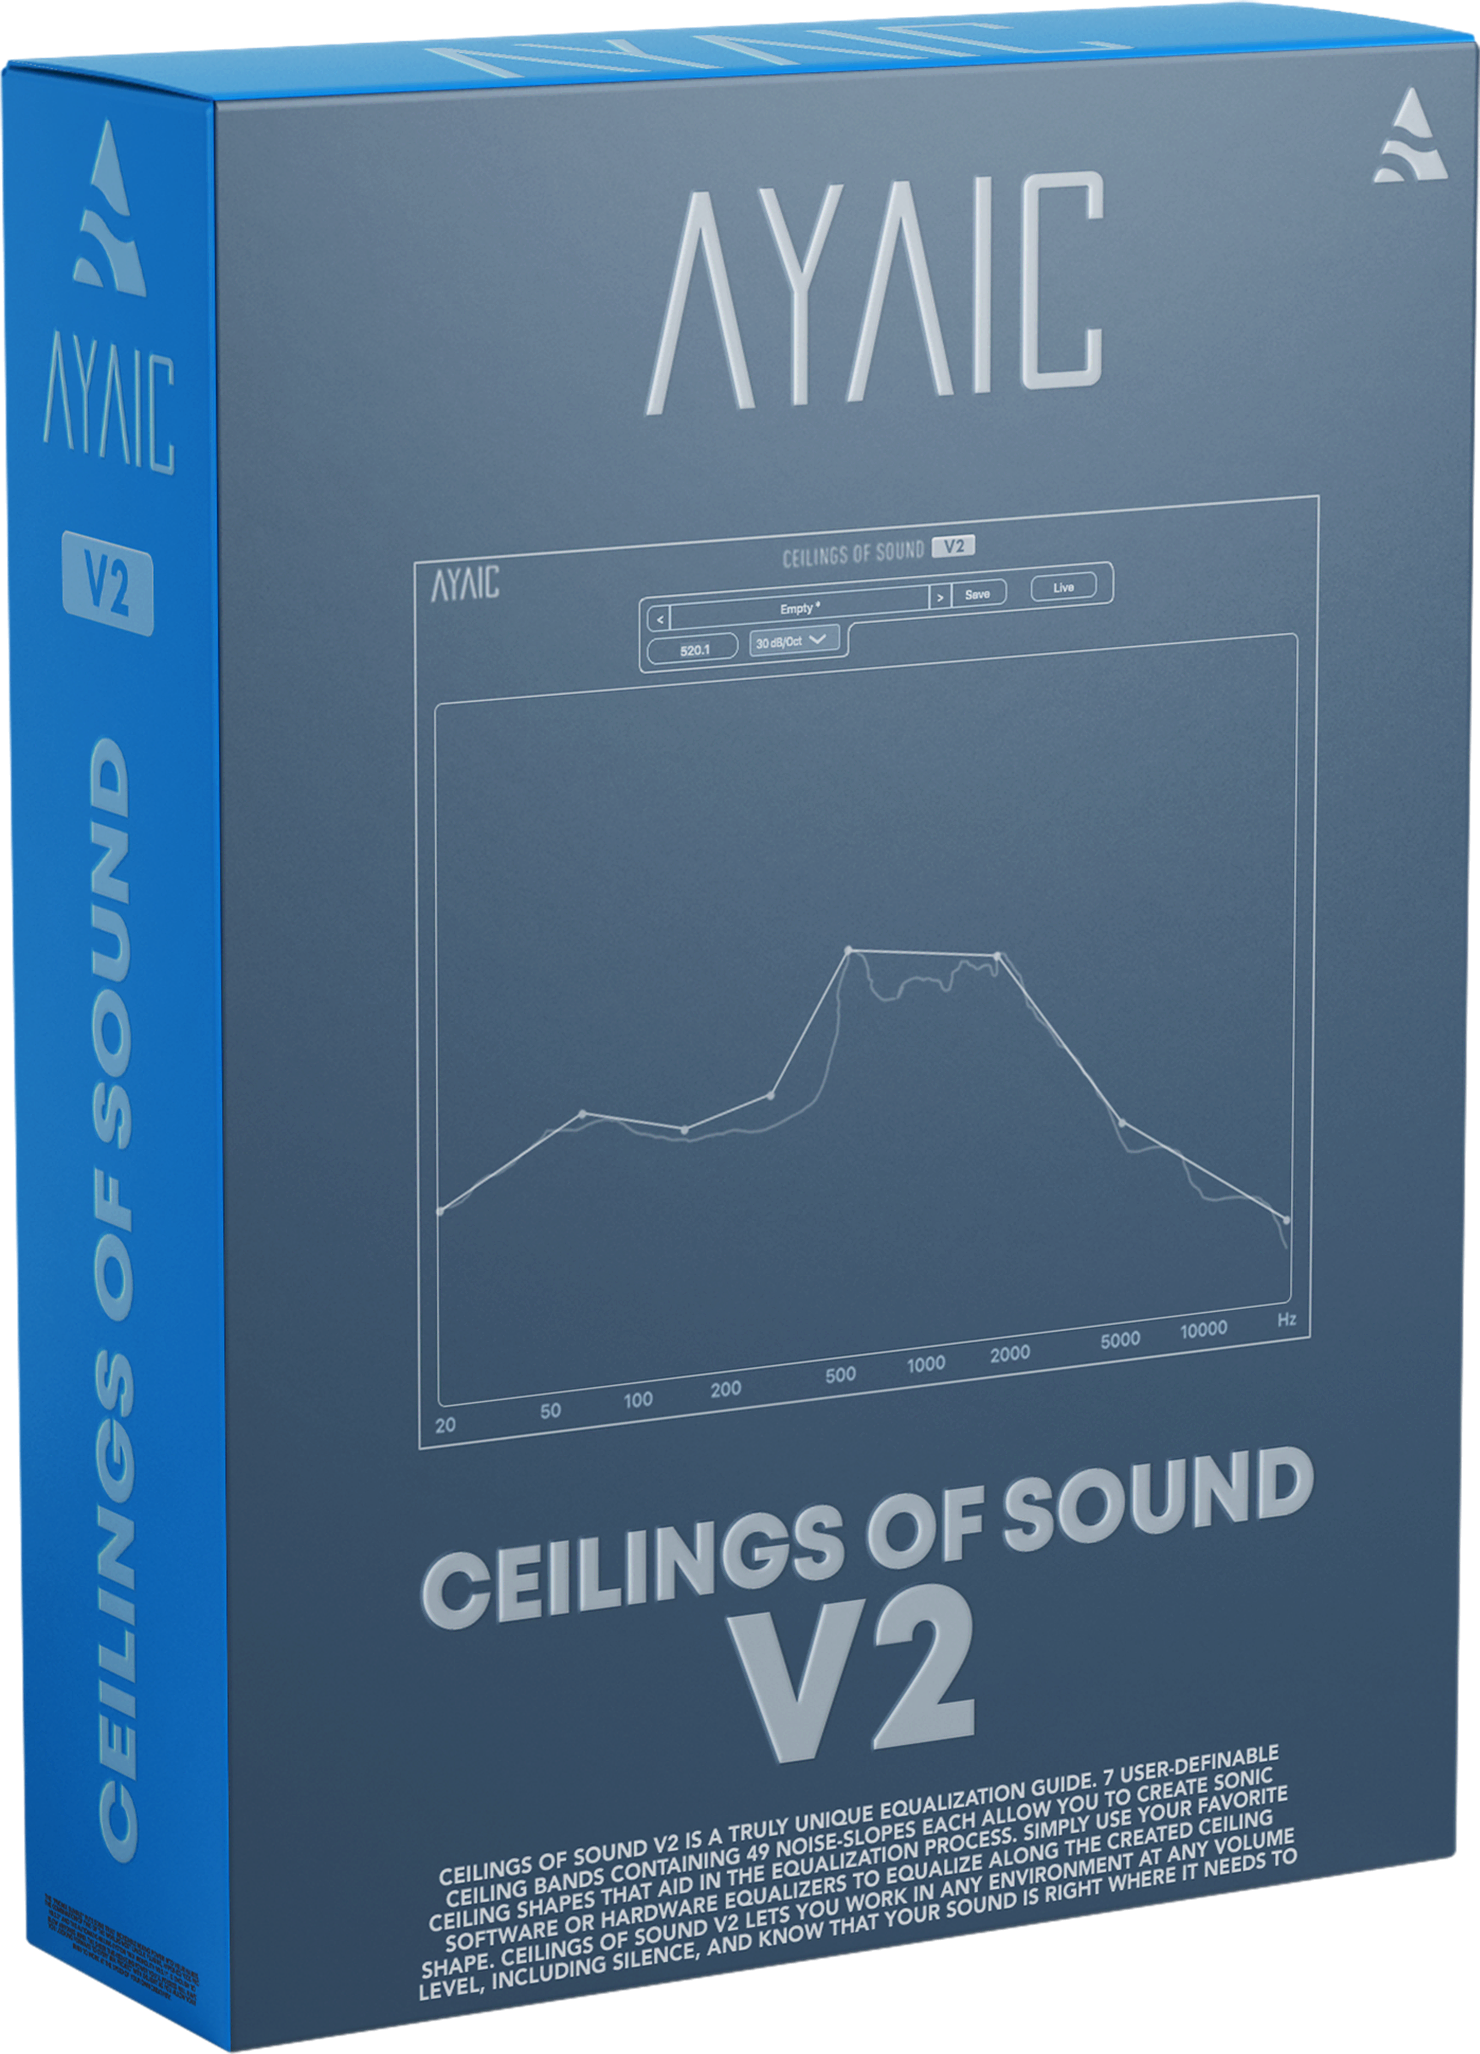 AyaicWare Ceilings Of Sound V2